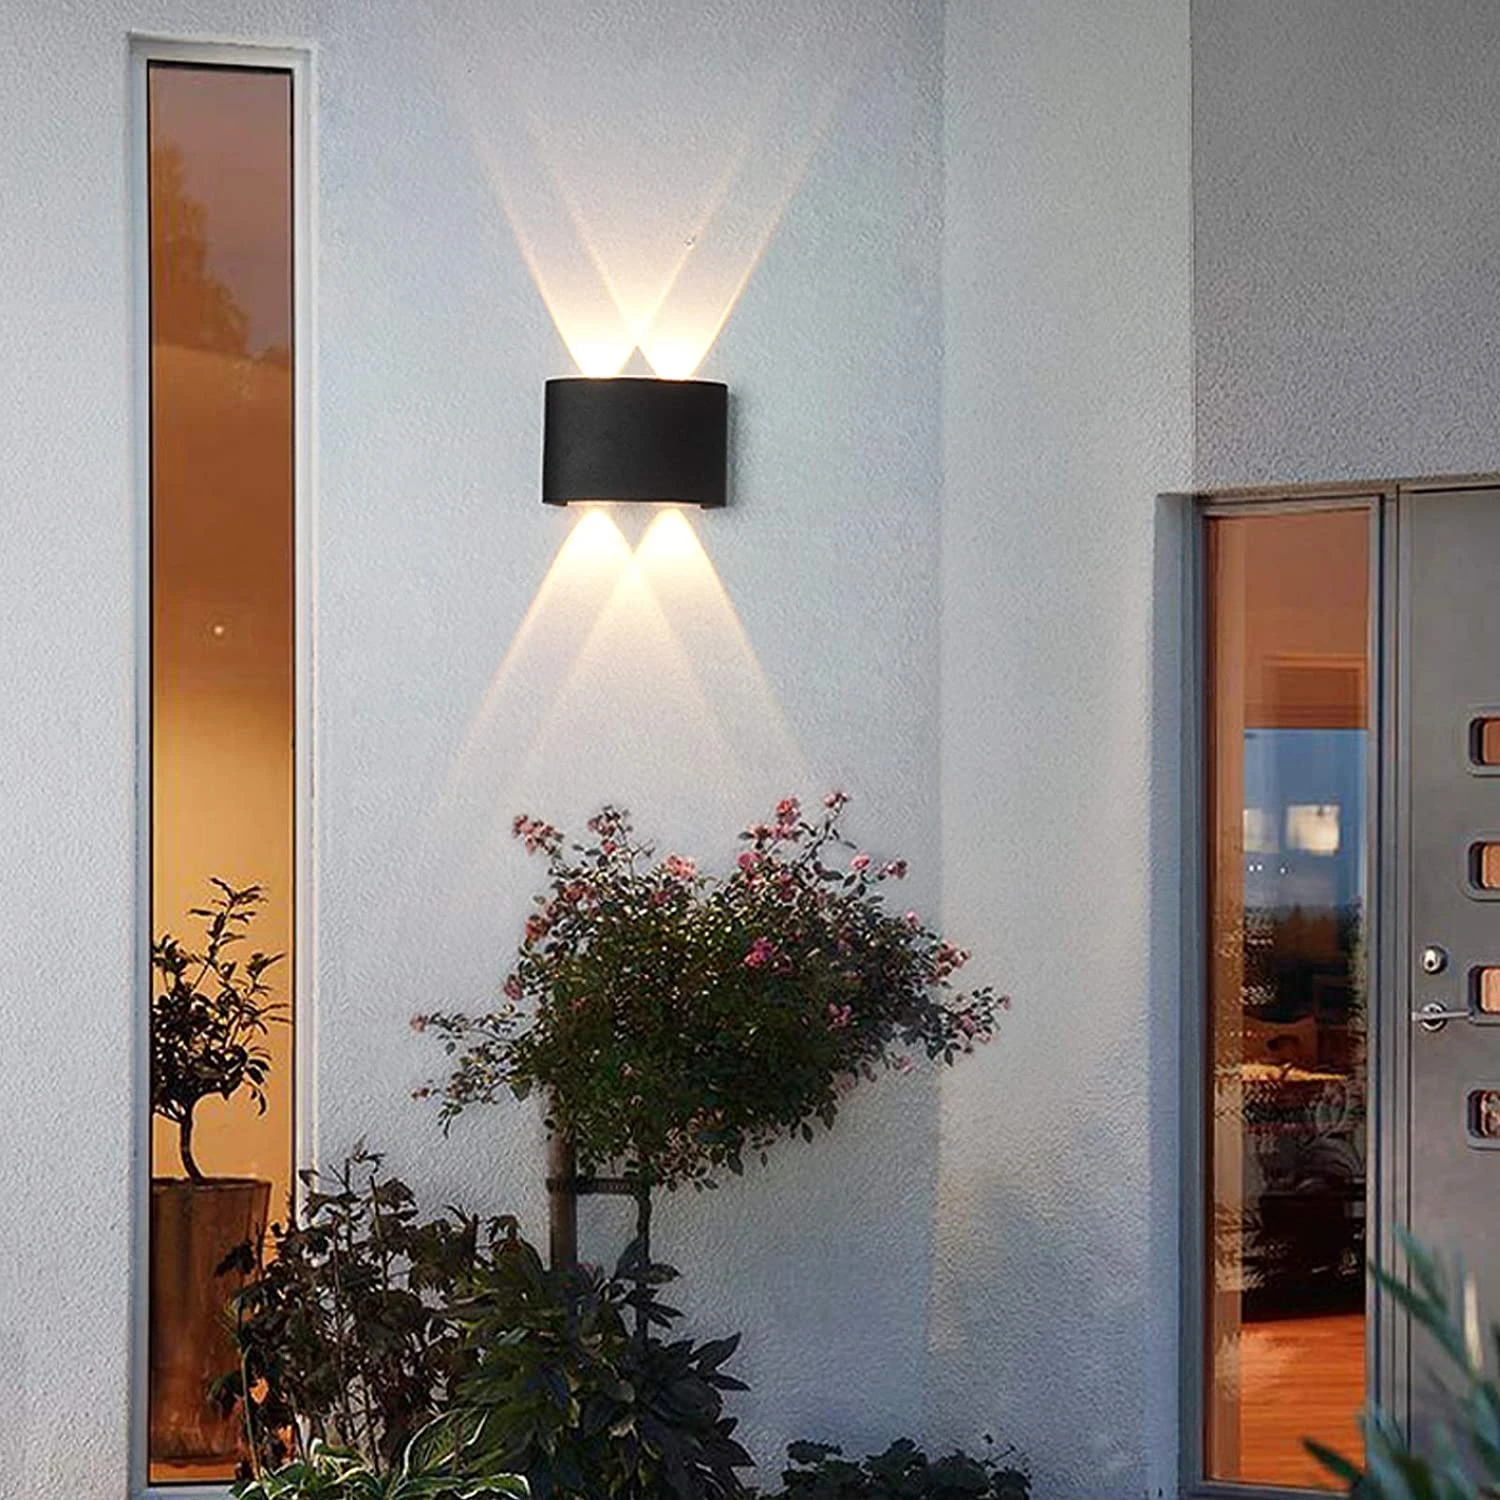 Modern Wall Sconces 4W 3000K Warm White Wall Sconce Lighting for Hallway Bedroom Bathroom Porch Living Room